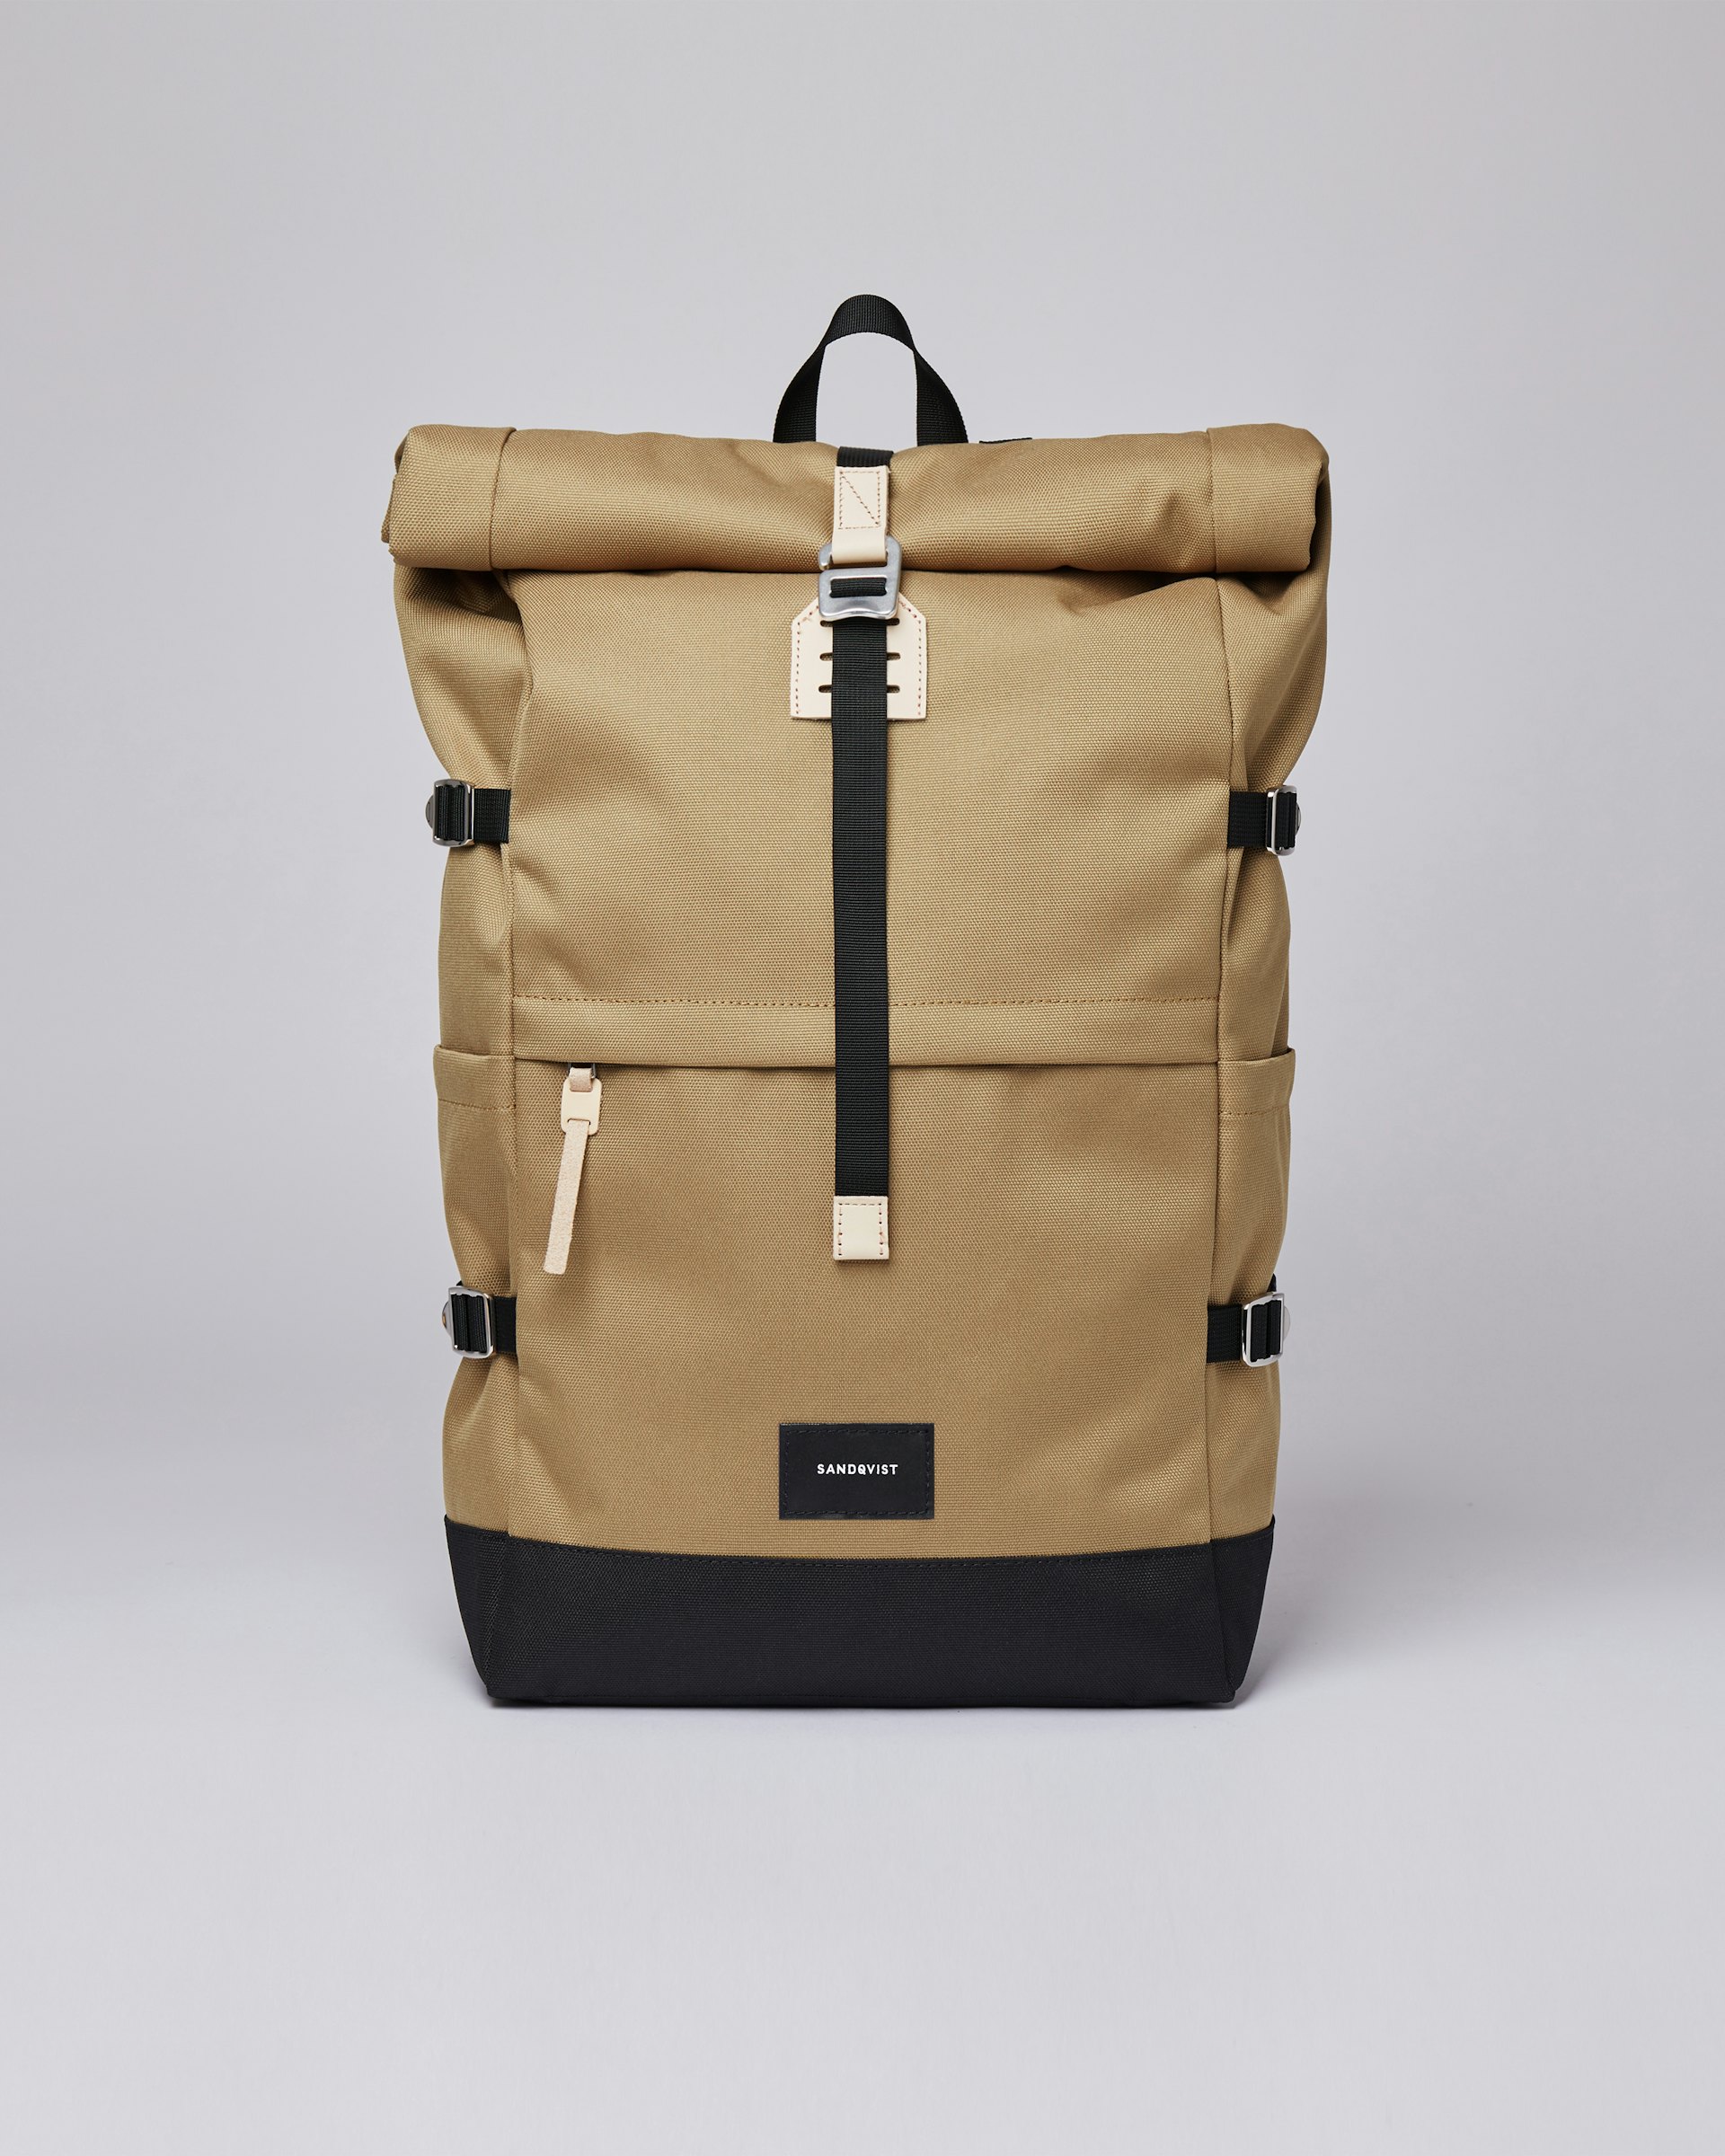 Bernt belongs to the category Backpacks and is in color bronze (1 of 7)